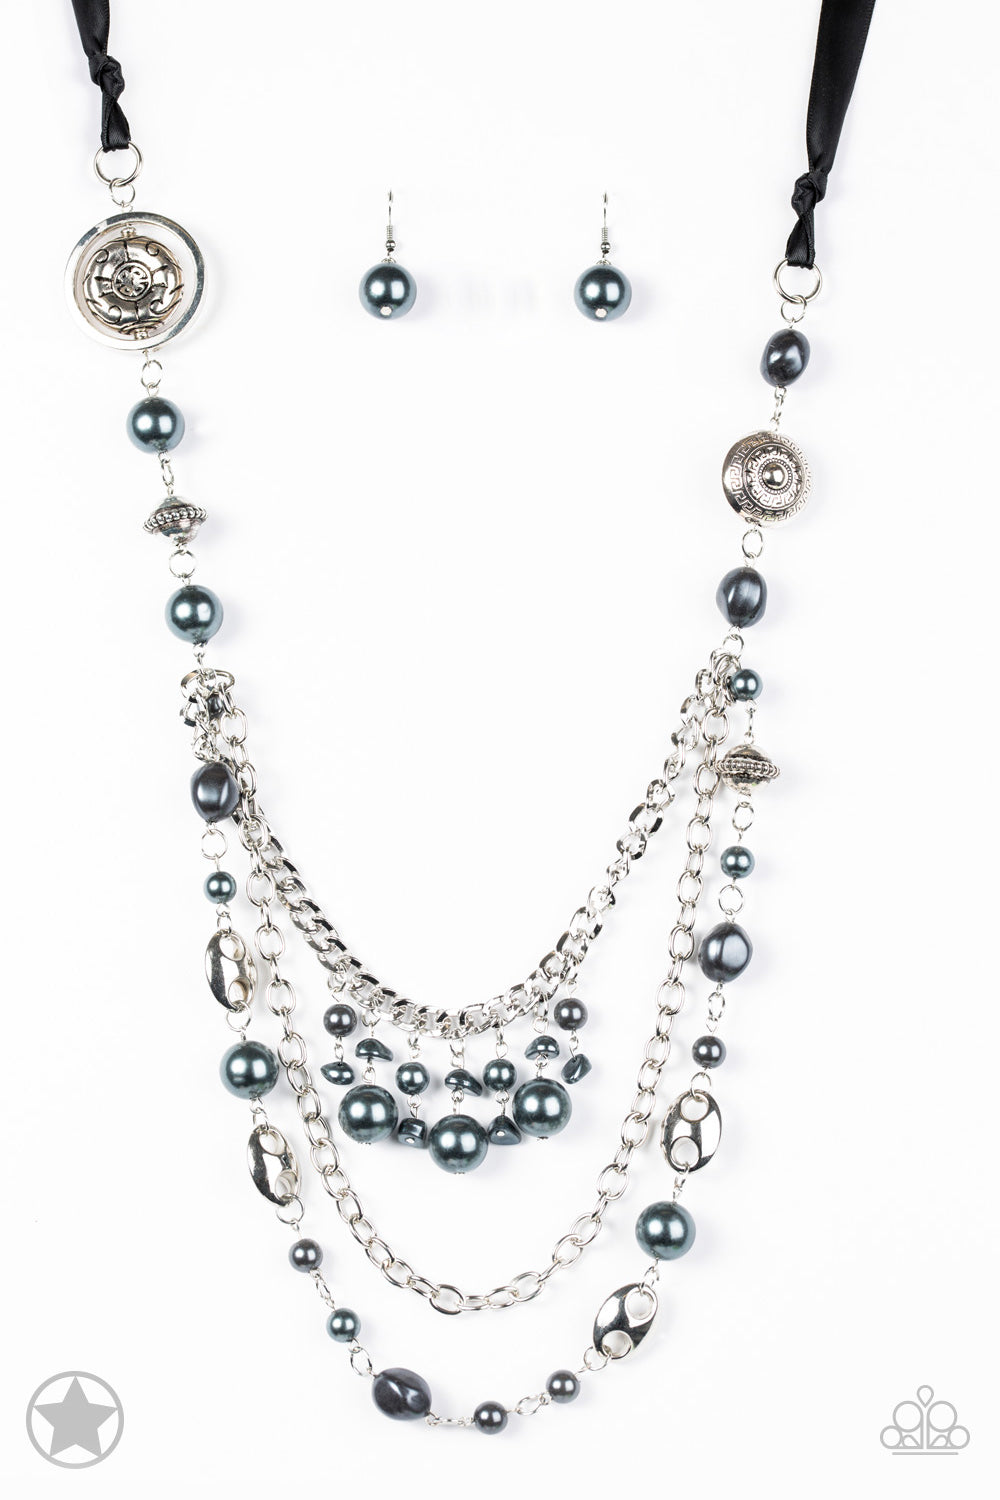 Paparazzi Accessories All the Trimmings - Black Necklaces a silky black ribbon replaces a traditional chain to create a timeless look. Pearly dark gray beads and funky silver pieces intermix with varying lengths of silver chains to give a fresh take on a Victorian-inspired piece.